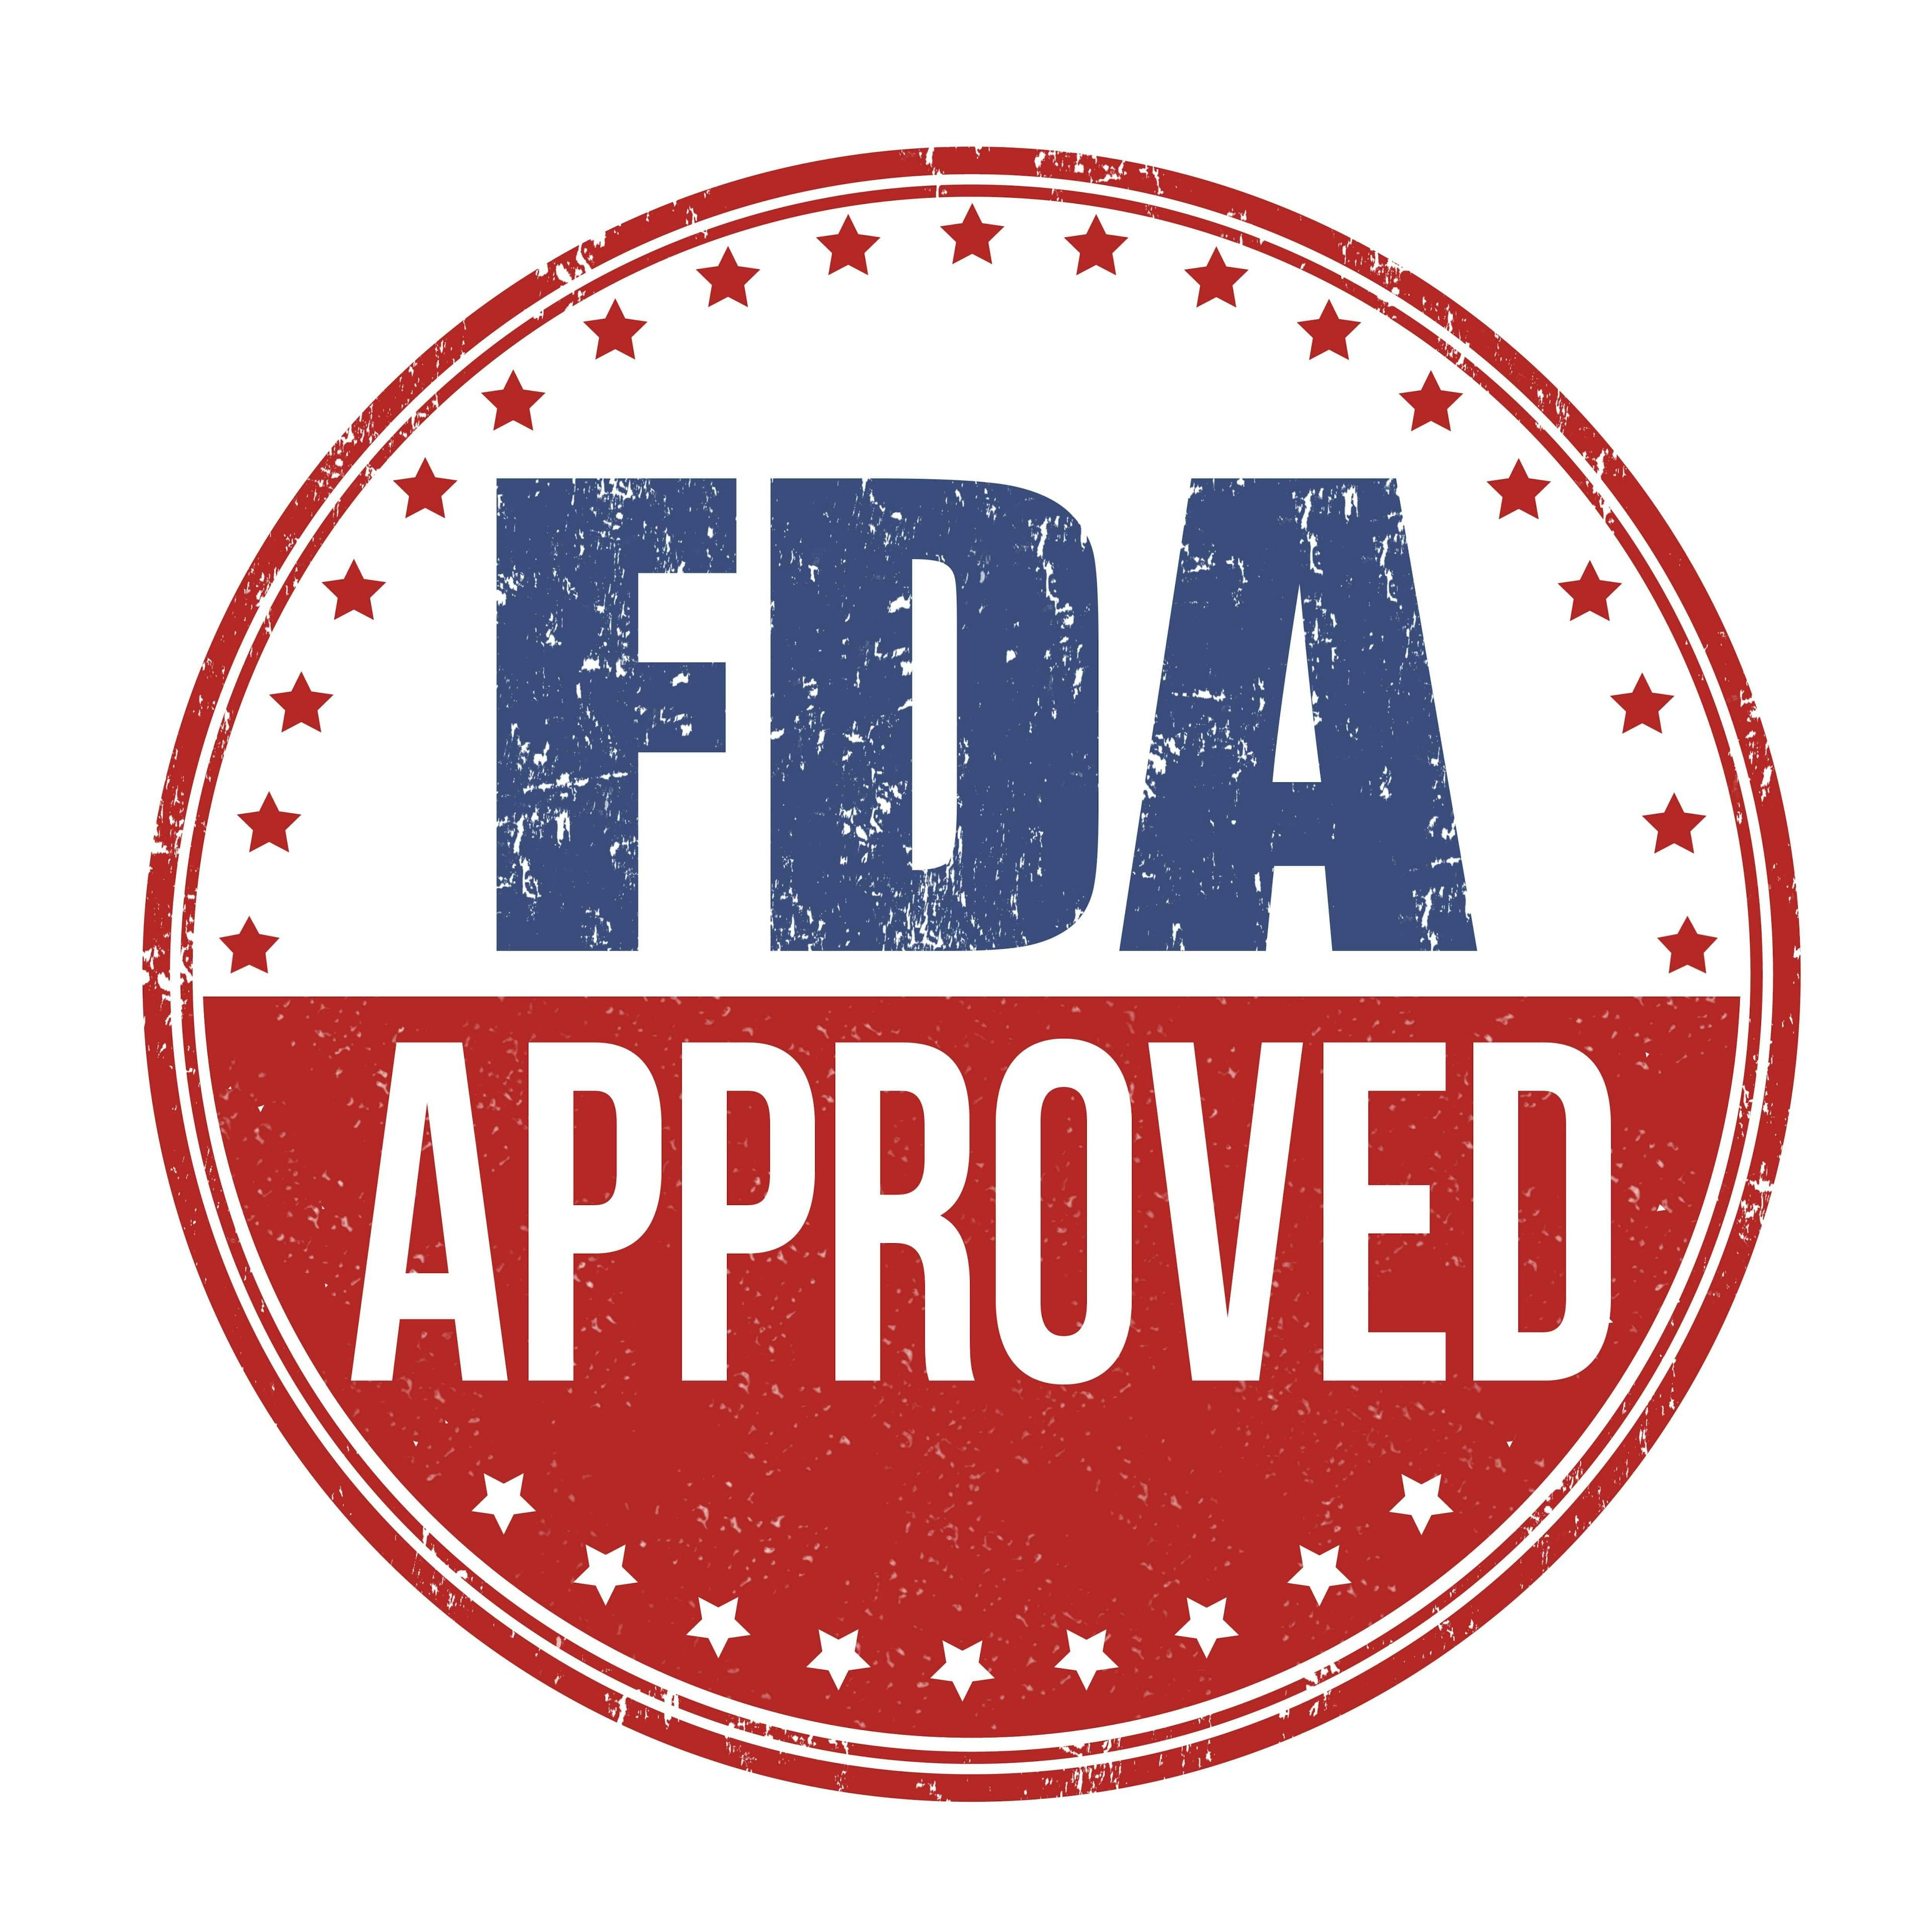 FDA approved.